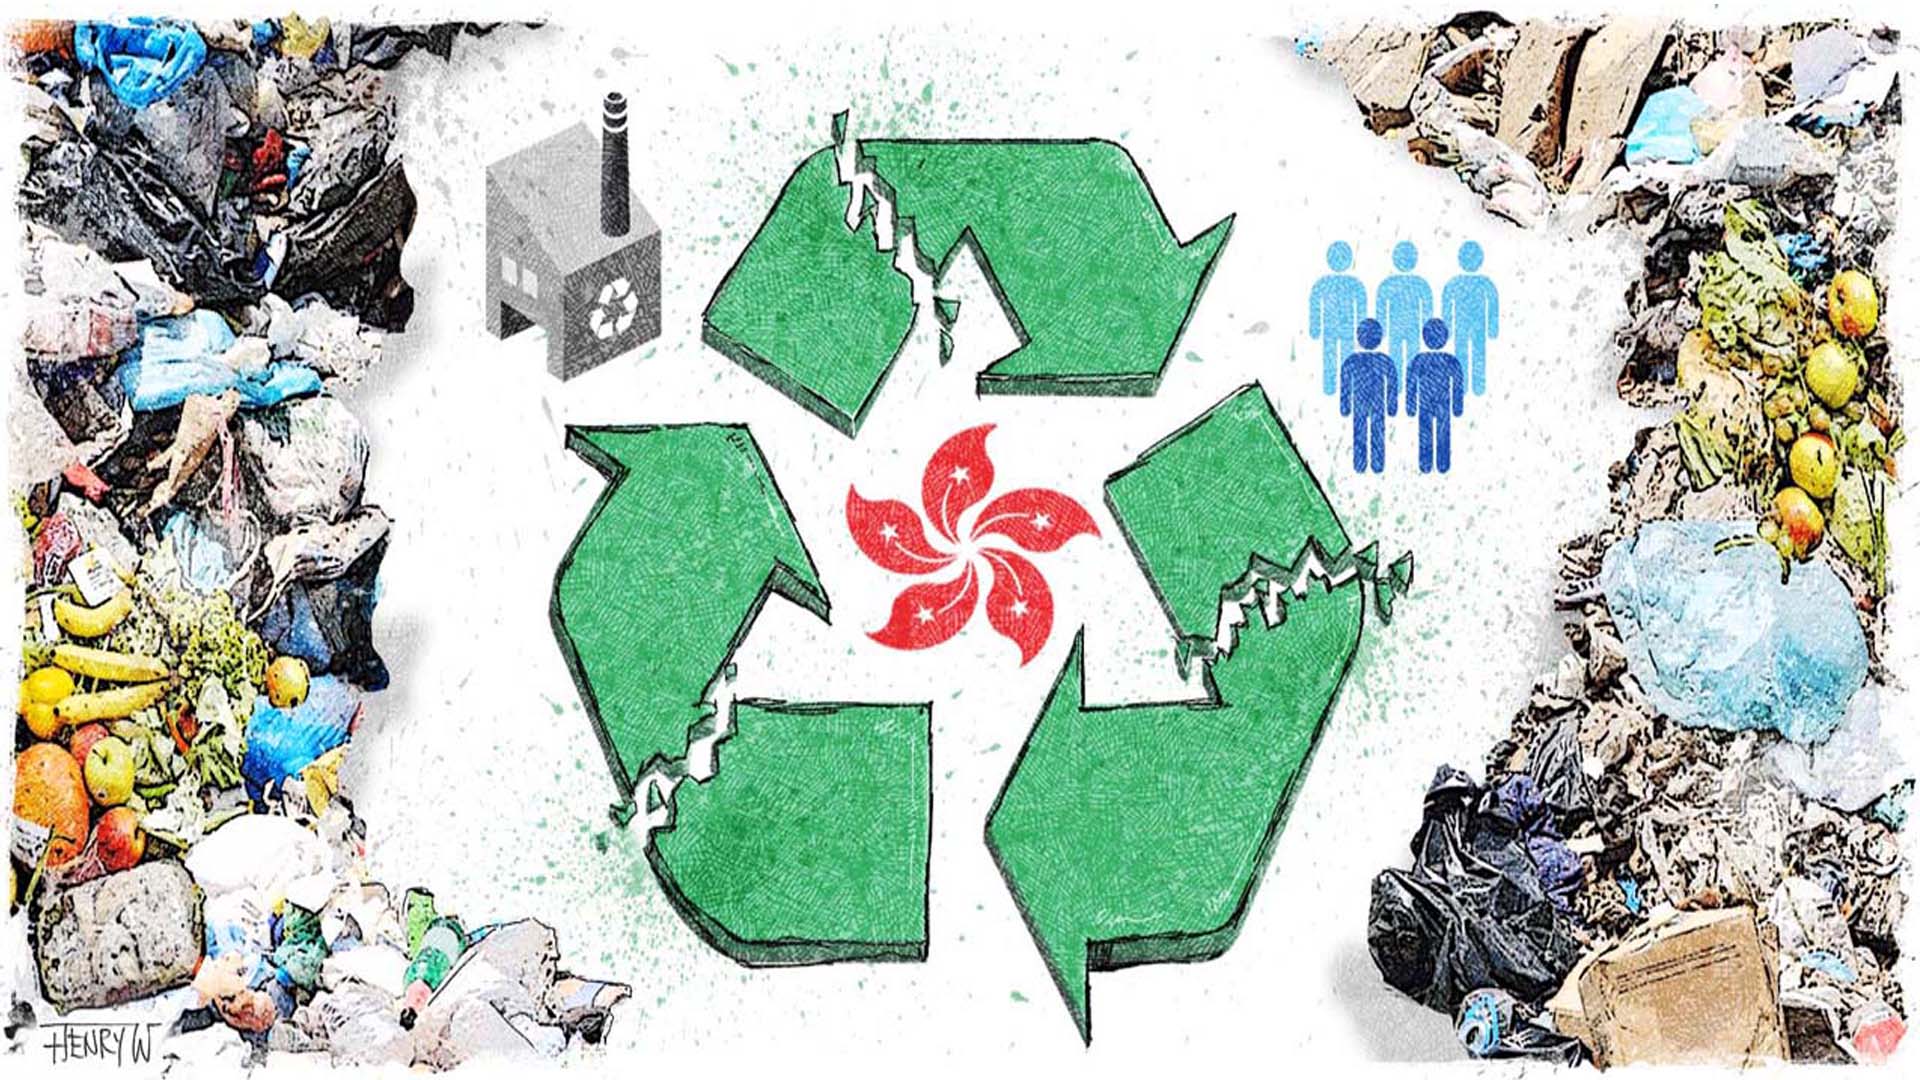 There are big opportunities for job creation, innovation and technology advancement if trust is restored in the recycling system. 